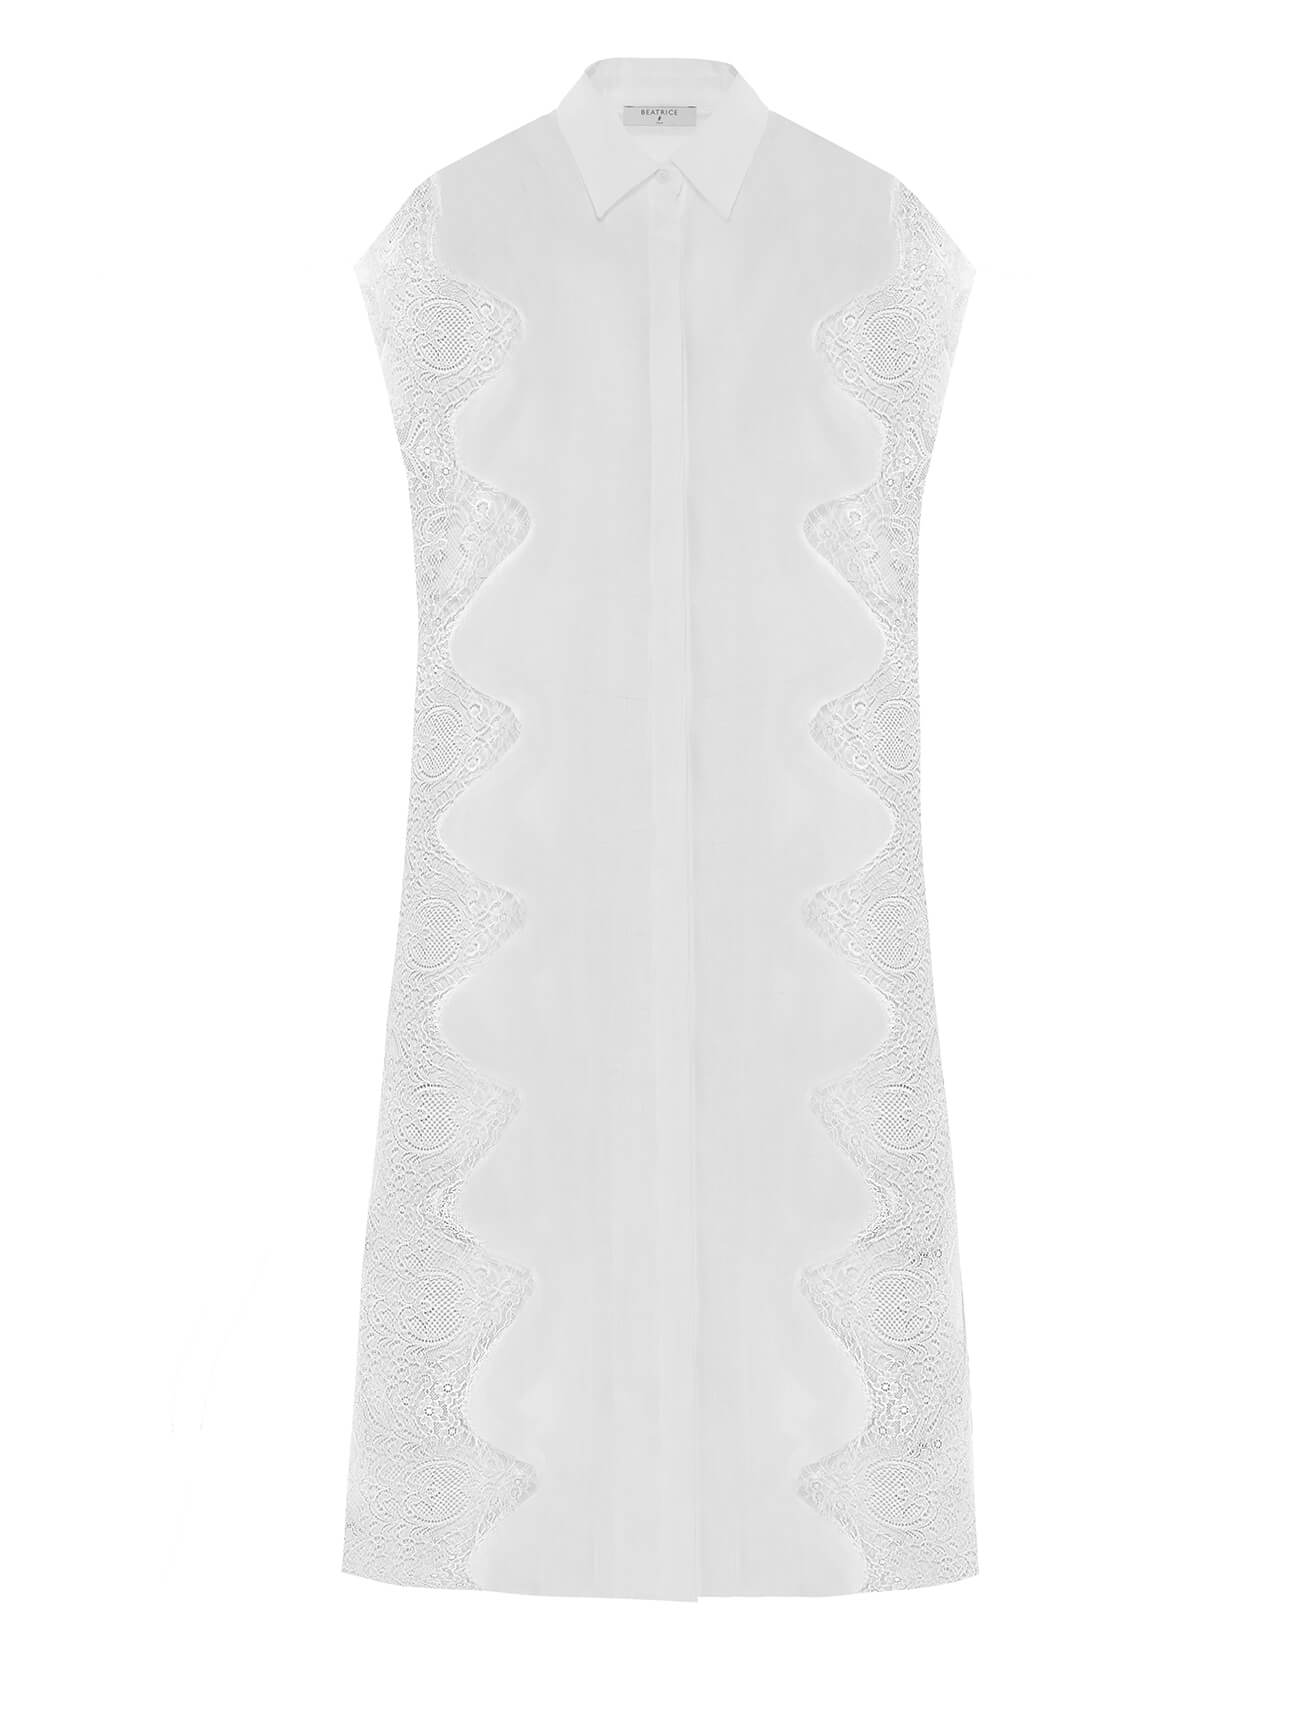 white chemisier dress with lace inserts